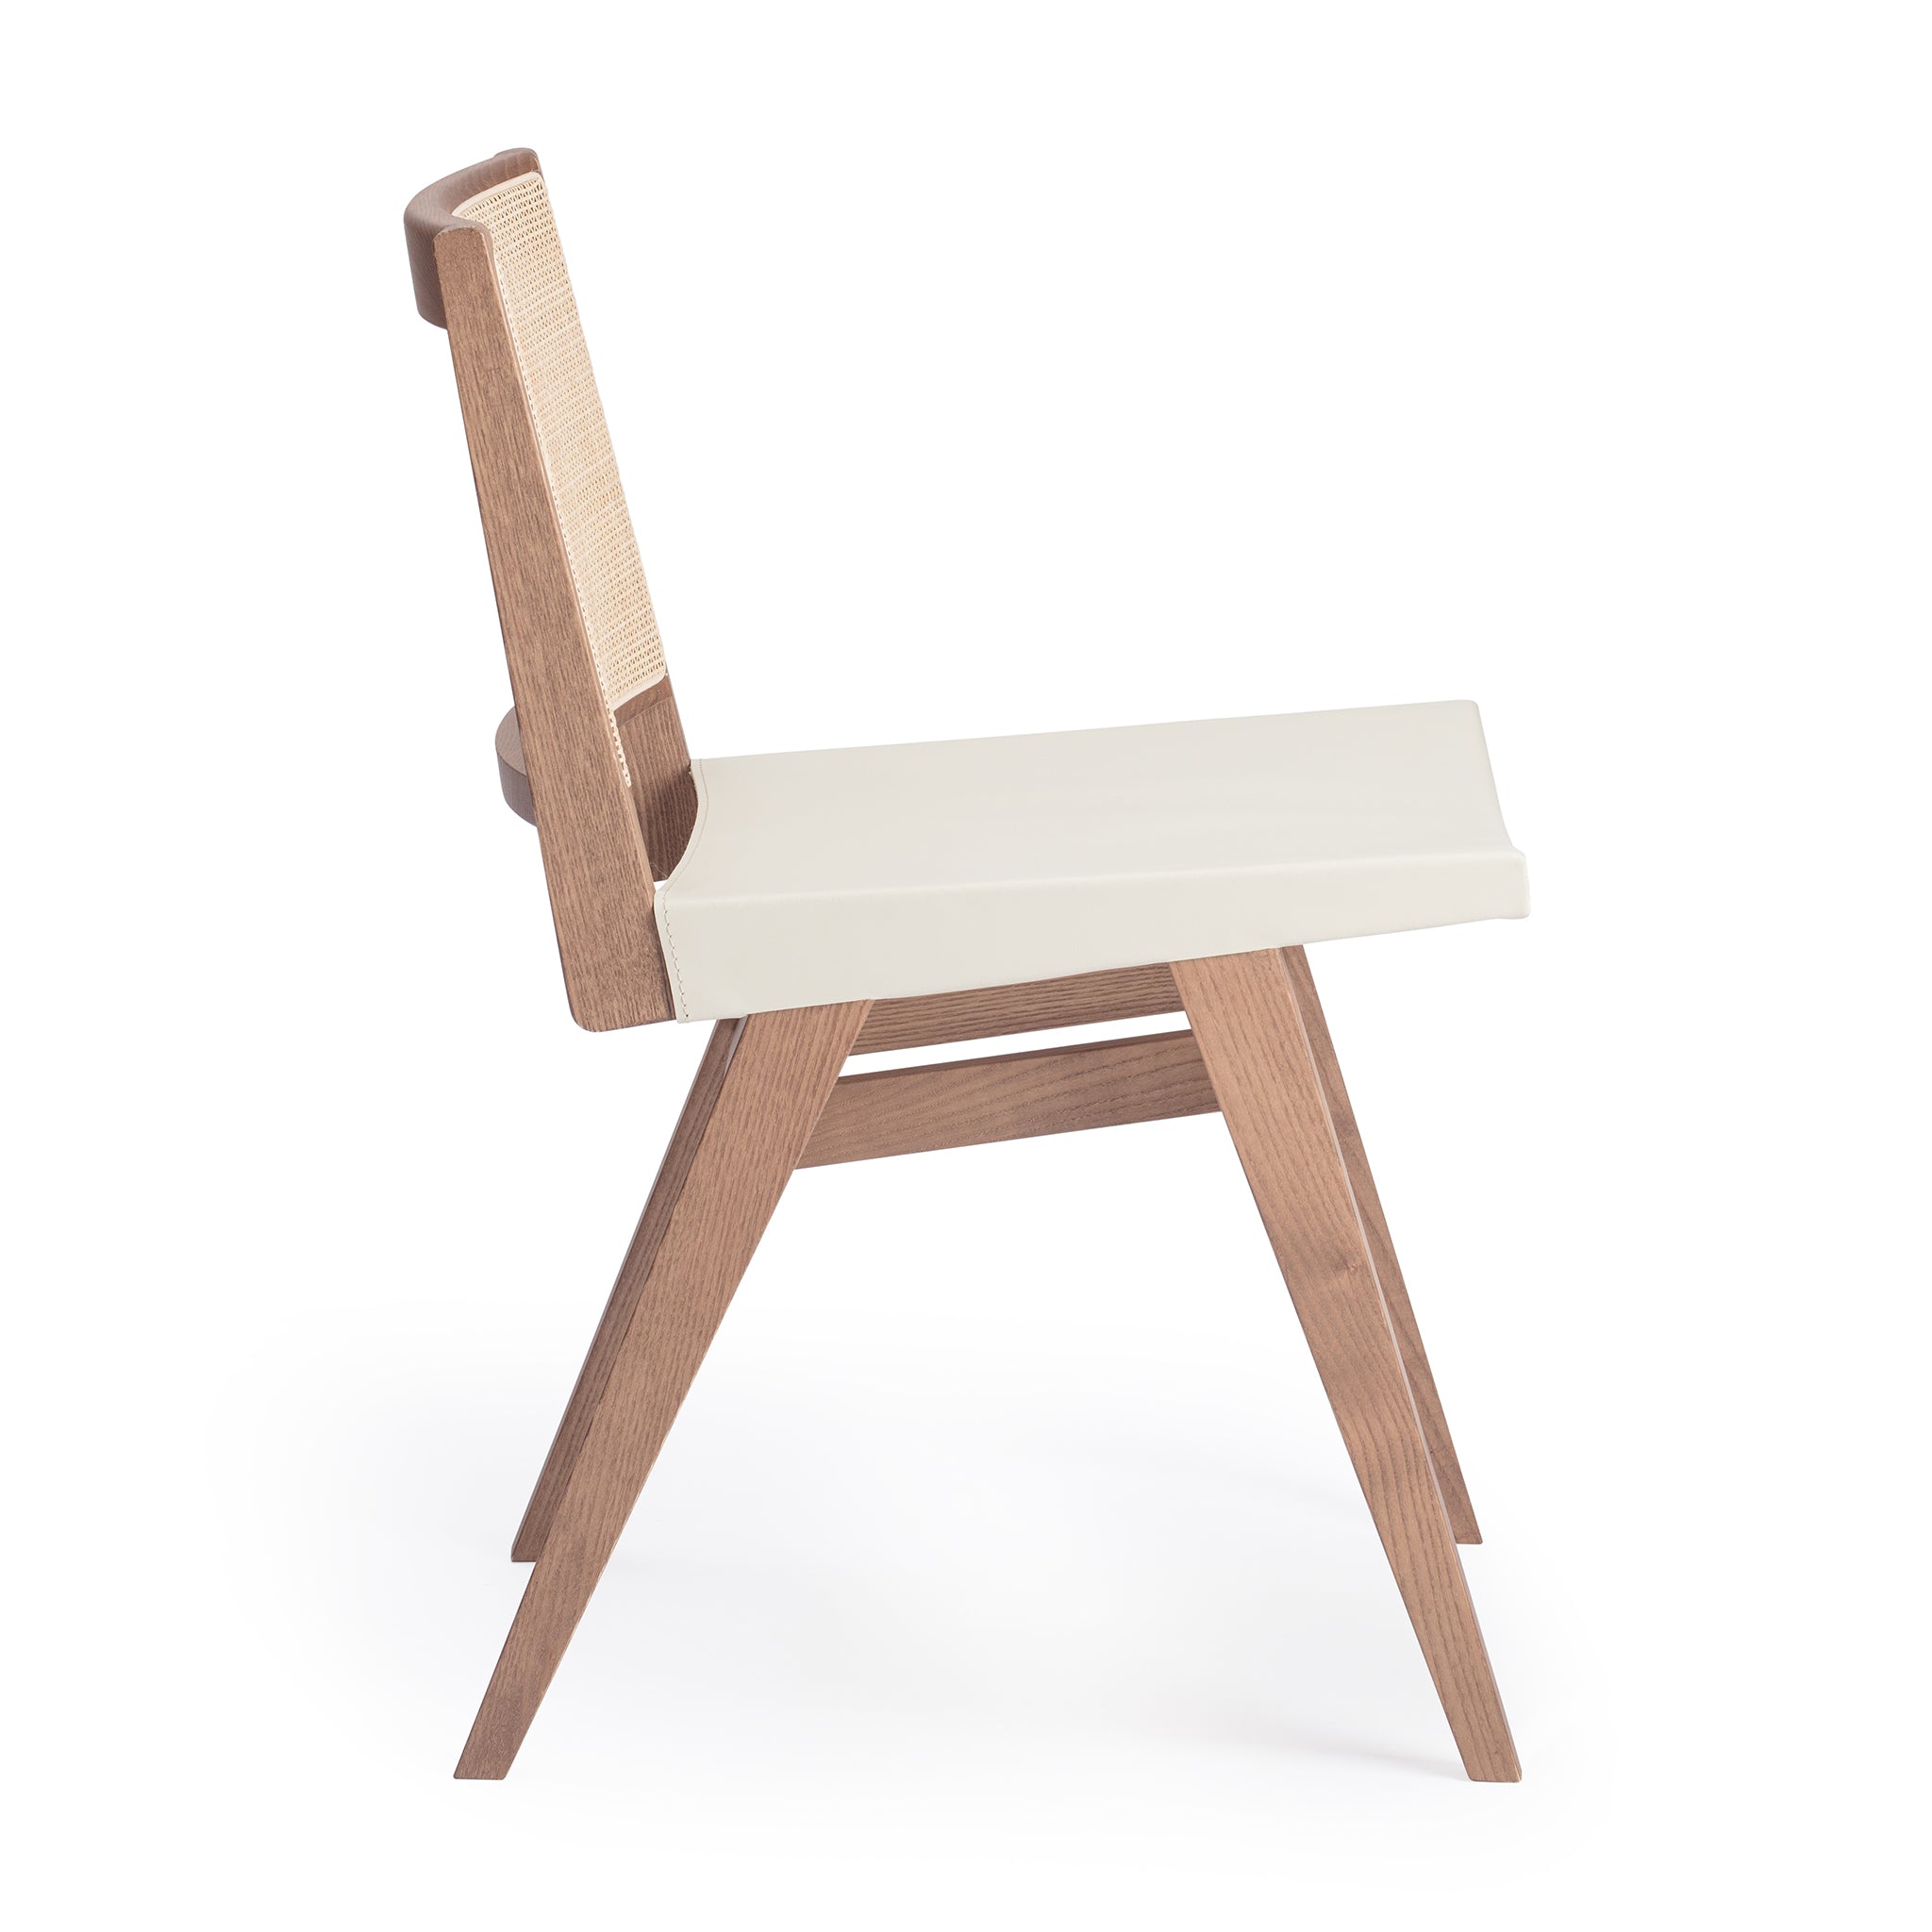 Side view of an "Elye" modern dining chair, walnut stained ash frame, square weave cane back, contract grade off white leather seat, produced by Klarel in Italy. #K41-1